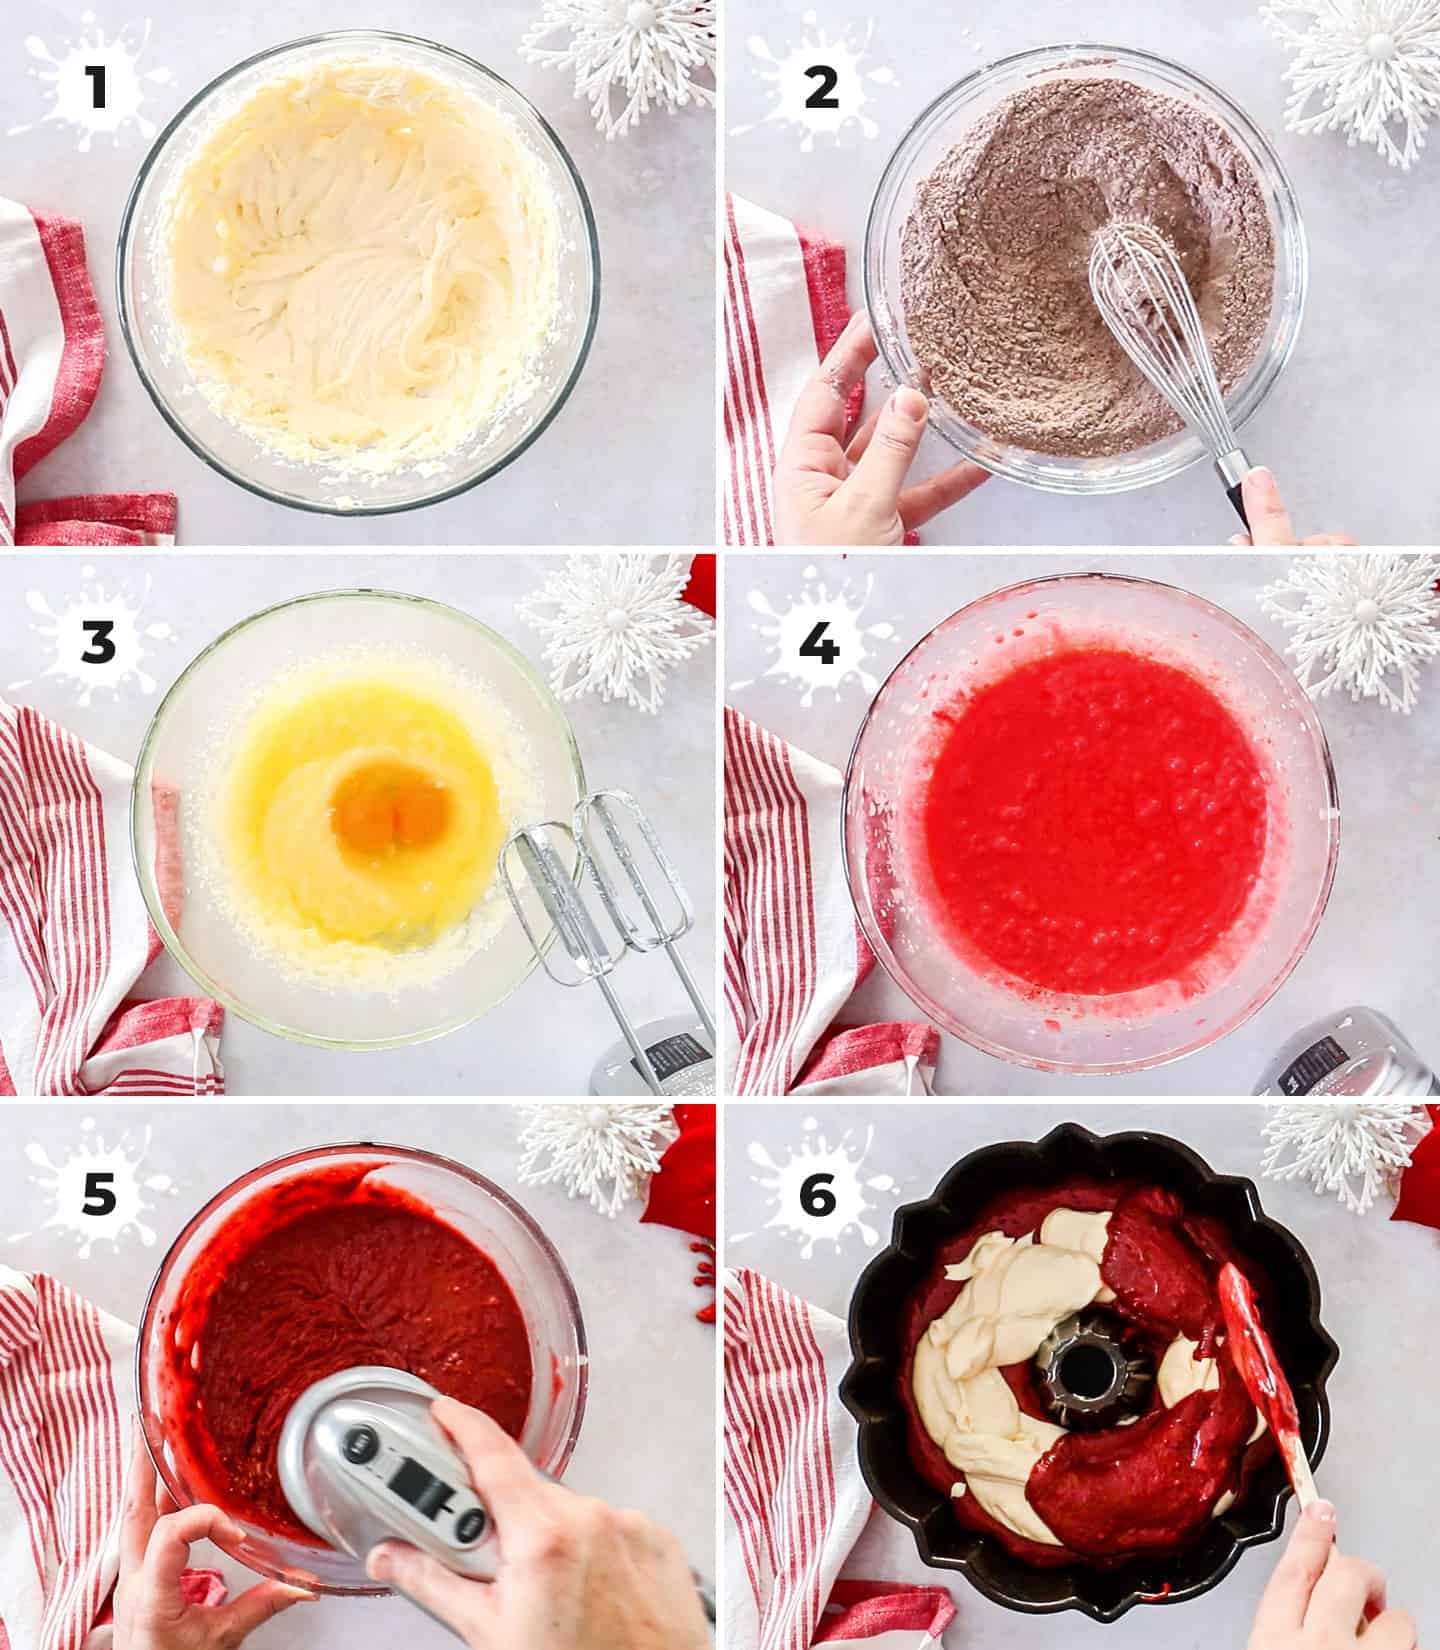 A collage of 6 images showing how to make red velvet bundt cake.